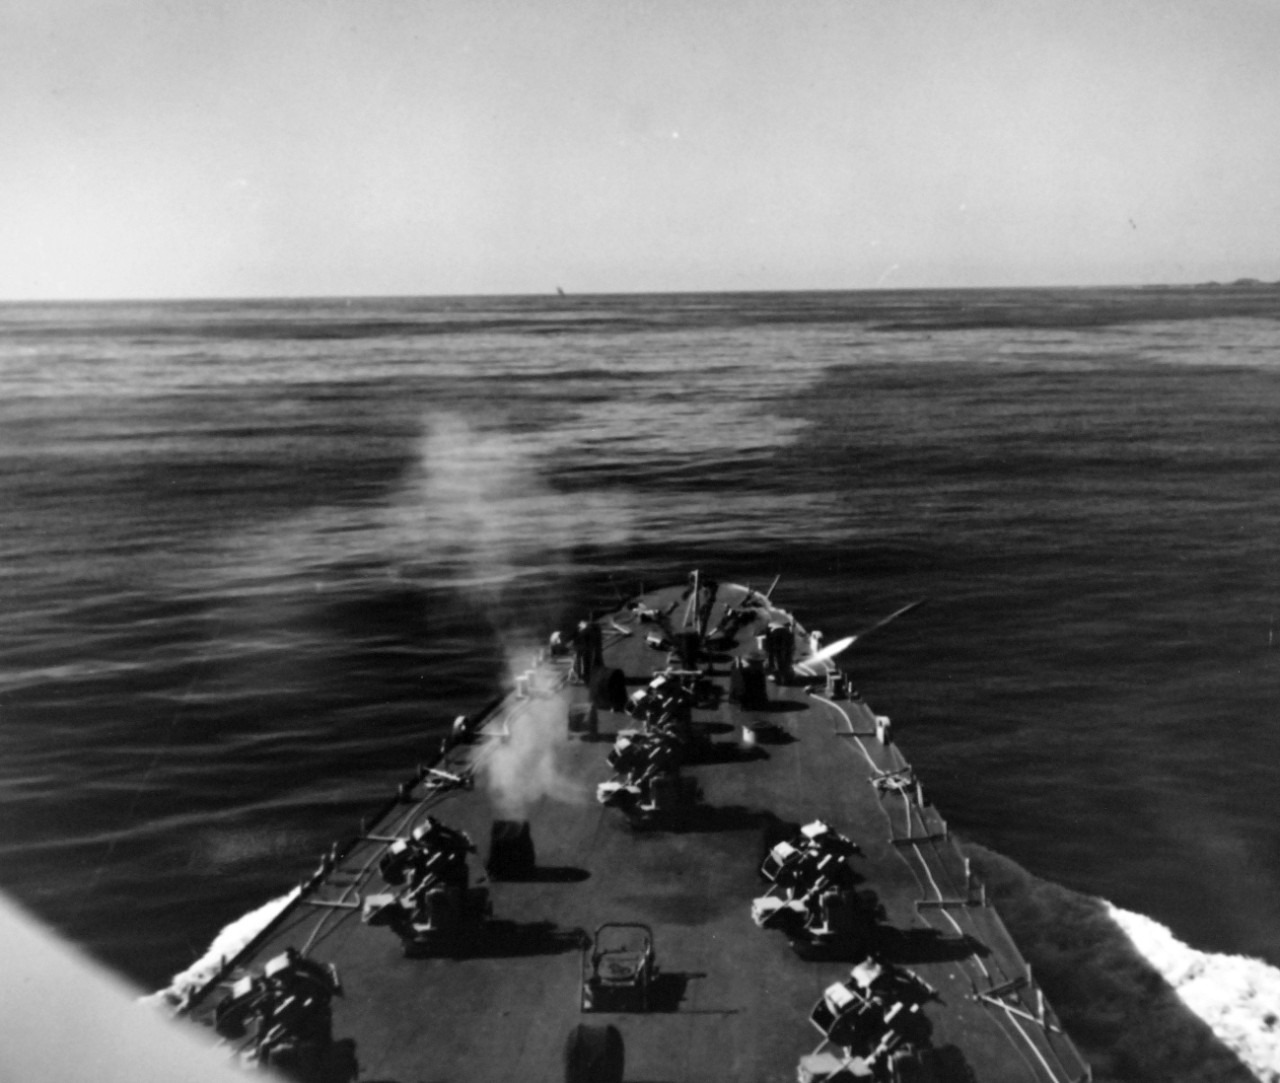 80-G-689759:  USS Carronade (IFS-1), late 1950s.  Firing rockets from deck.   Carronade was an Inshore Fire Support Ship, built to provide gunfire support to amphibious landings or operations close to shore. Official U.S. Navy Photograph, now in the collections of the National Archives.  (2017/11/01).  Photograph is extremely curved.  